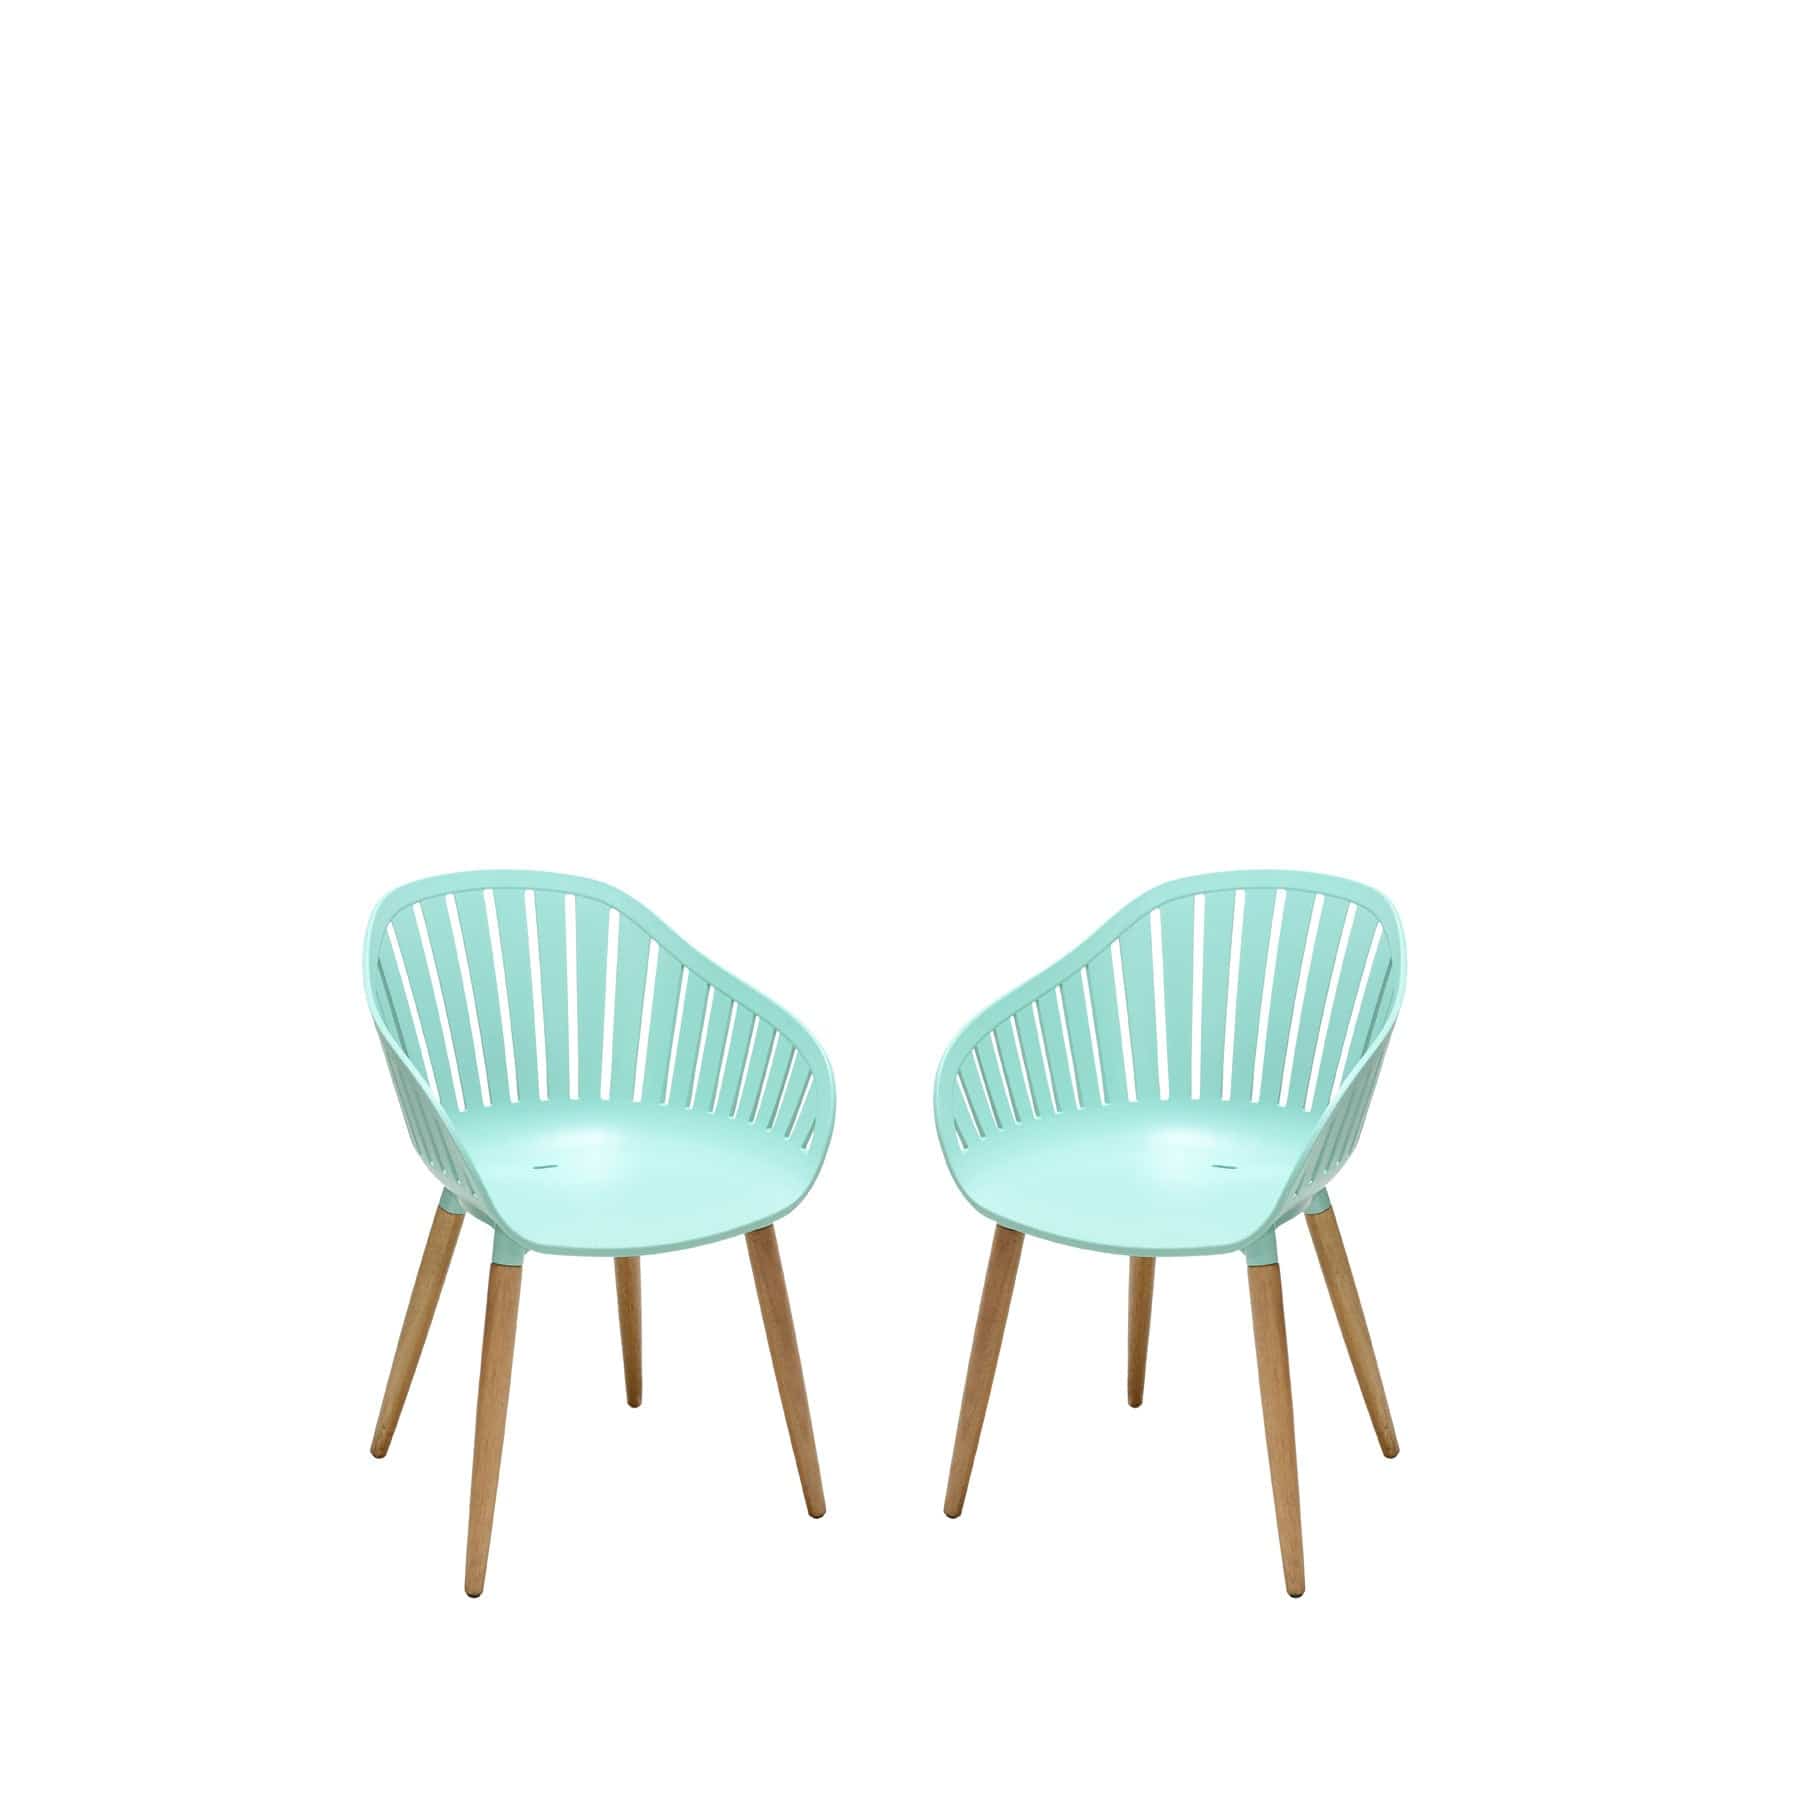 Two mint green modern dining chairs with wooden legs isolated on a white background